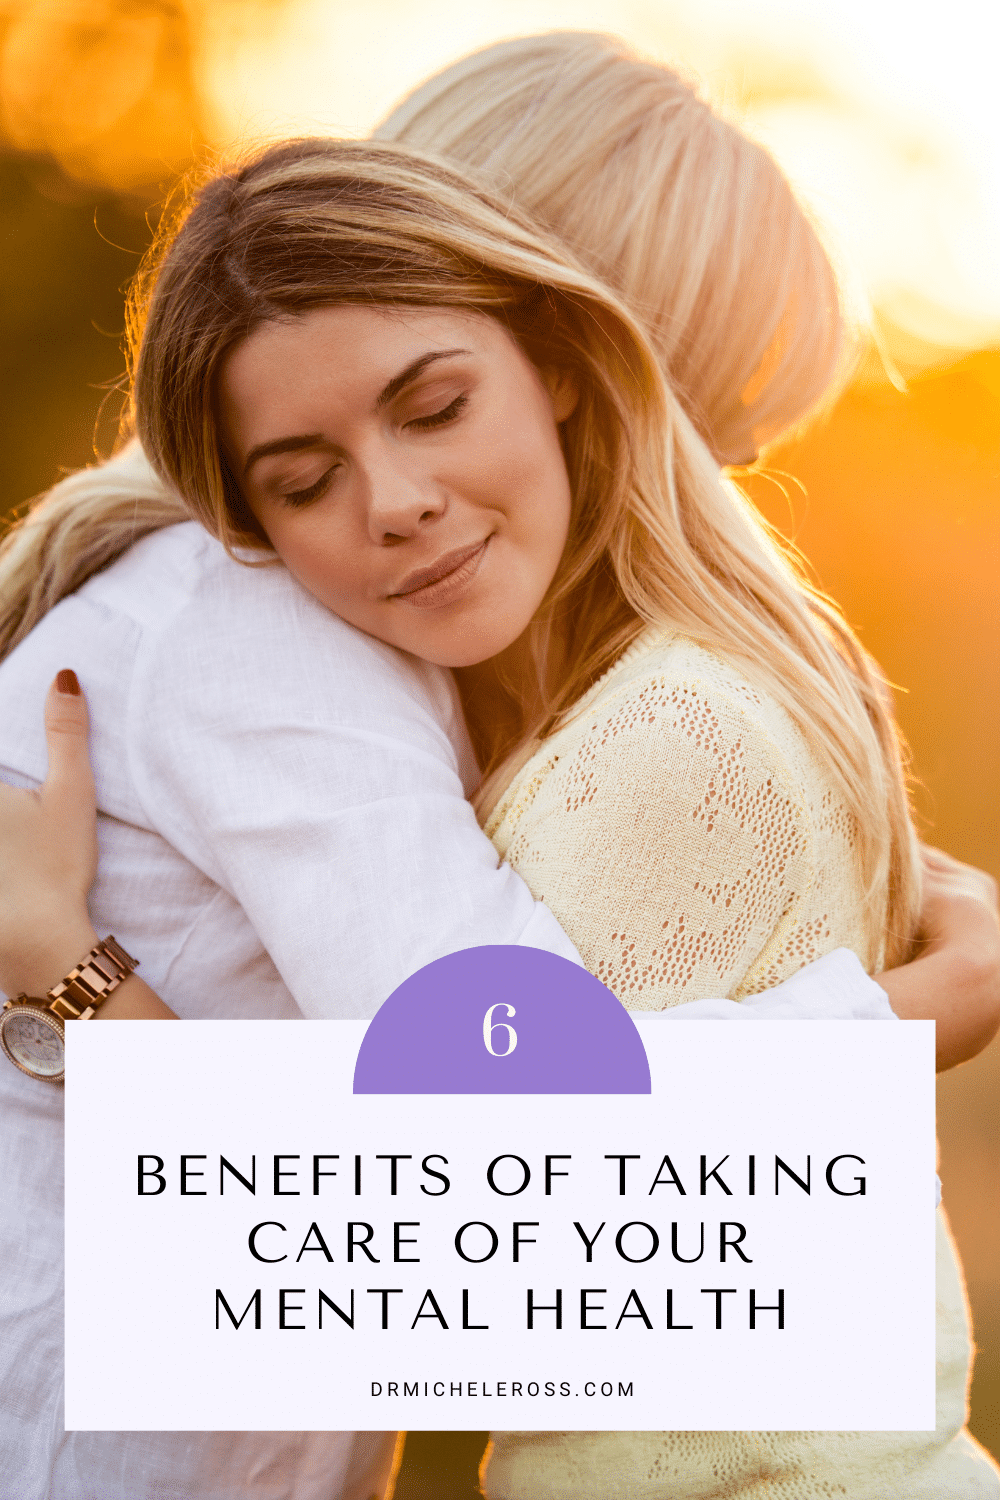 6 Benefits Of Taking Care Of Your Mental Health